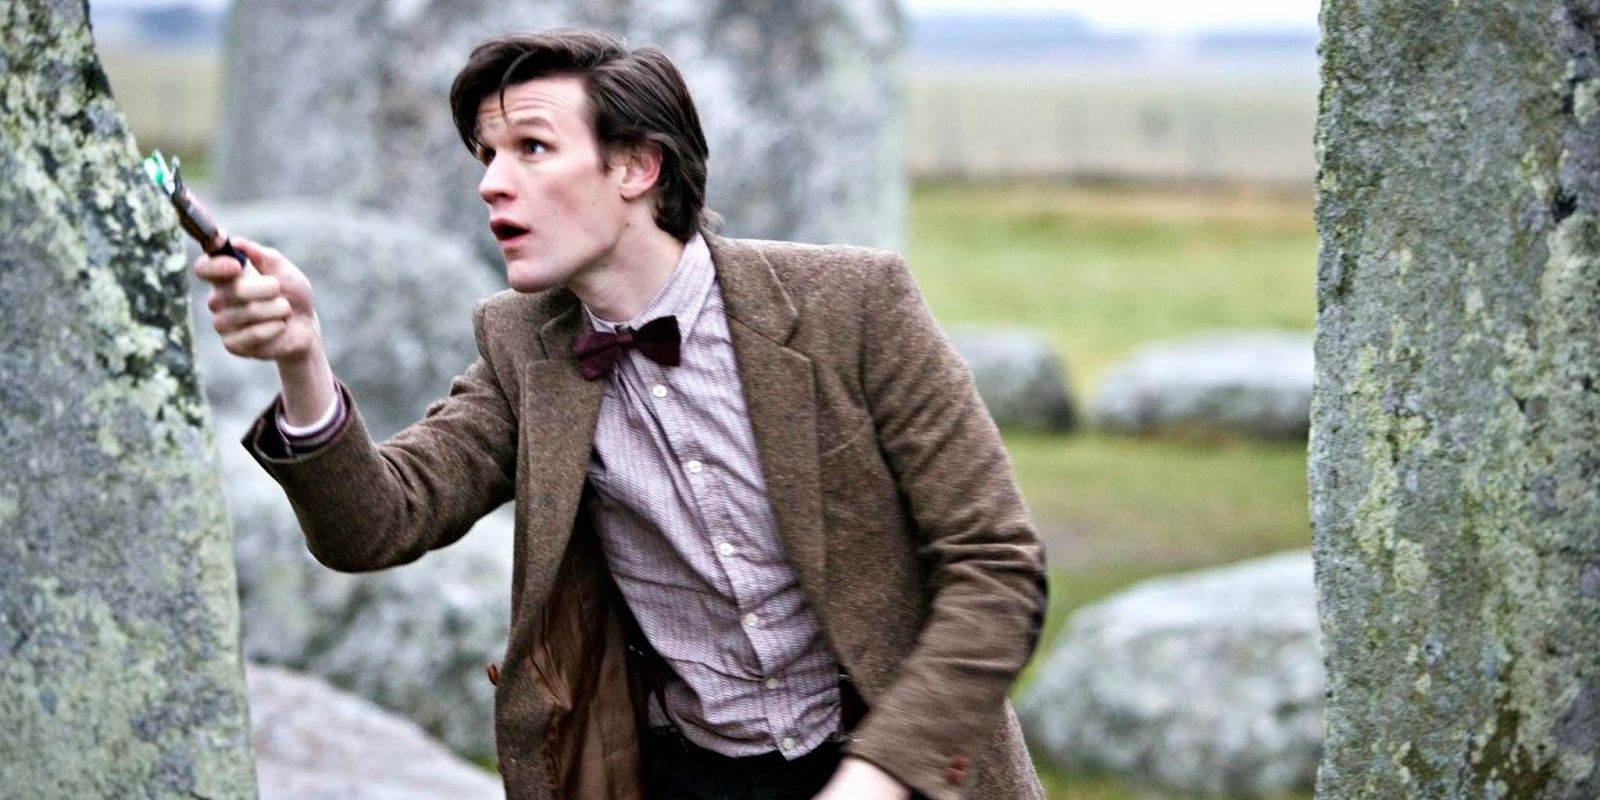 Eleventh Doctor using the sonic screwdriver in Doctor Who 